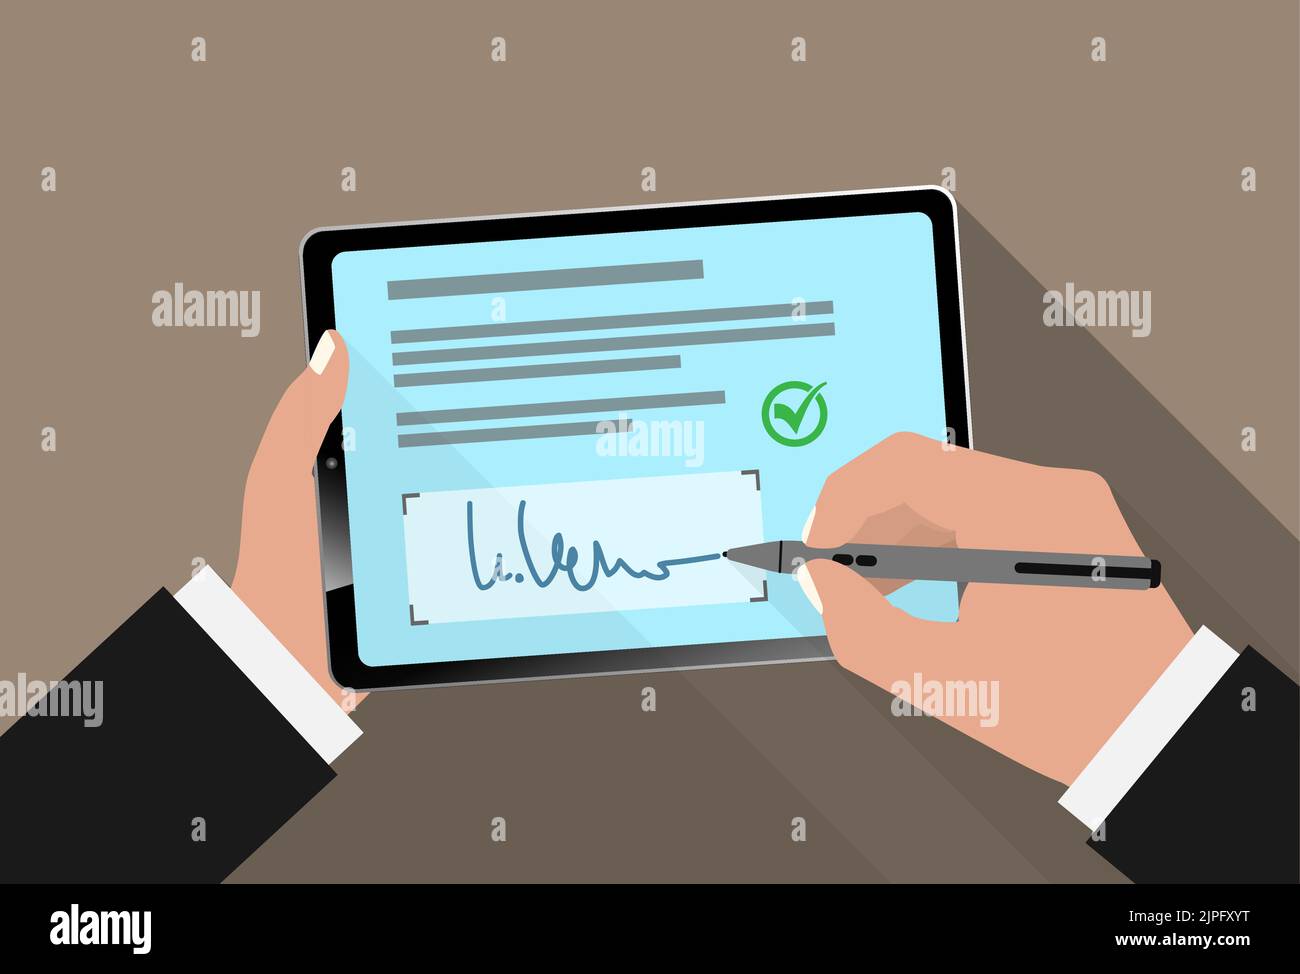 electronic signature with stylus on tablet computer touchscreen, vector illustration Stock Vector